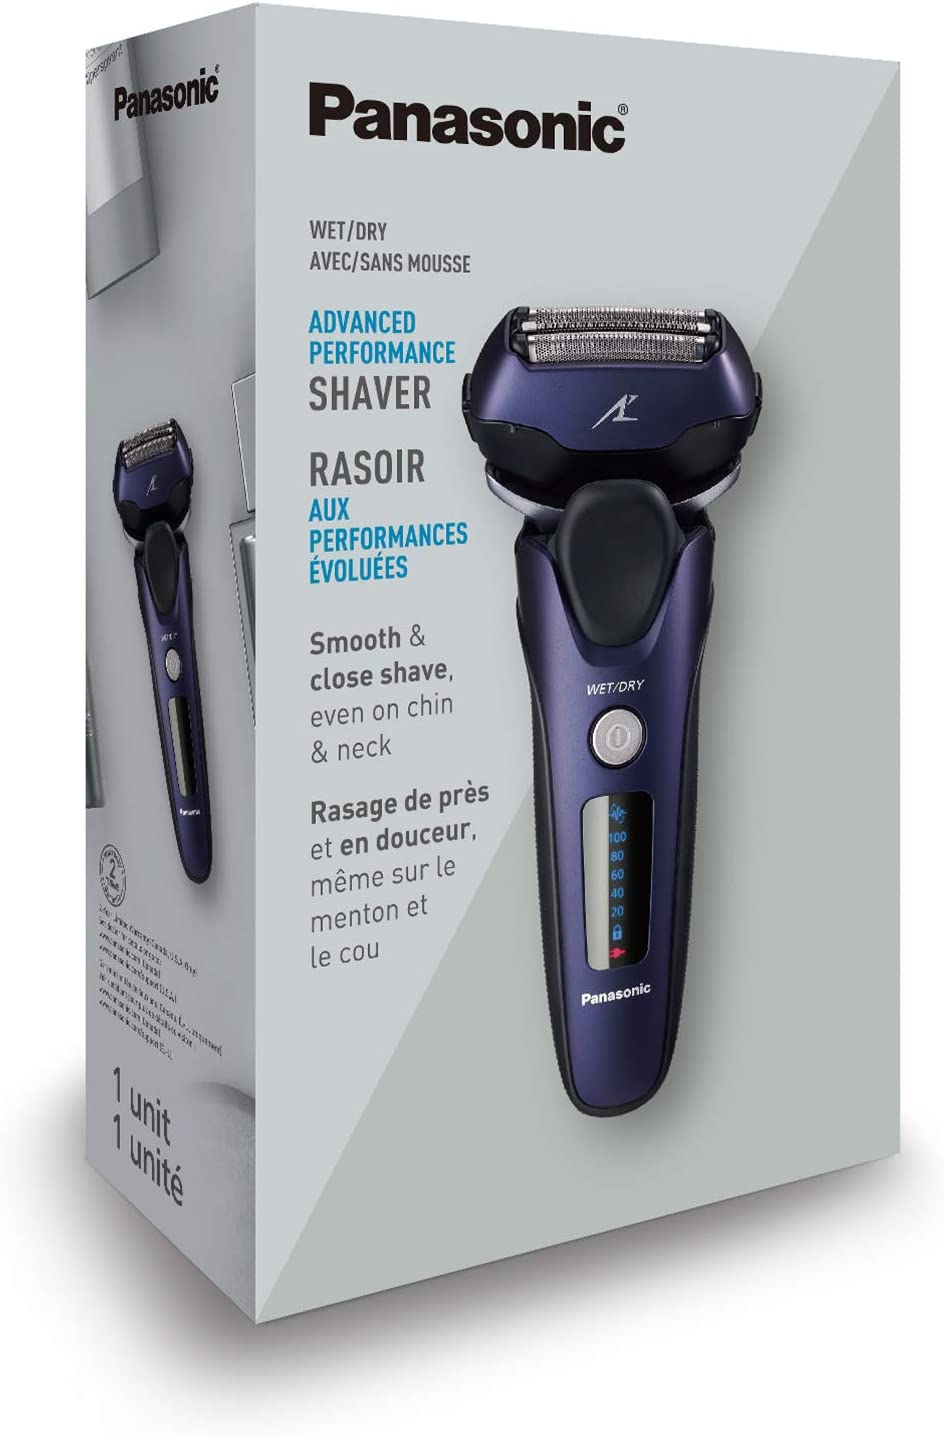 Panasonic ARC3 Wet Dry 3-Blade Shaver with Pop-Up Trimmer and Intelligent Shave Sensor, 12D Flexible Pivoting Head ES-LT67-A - Blue freeshipping - Pro-Distributing